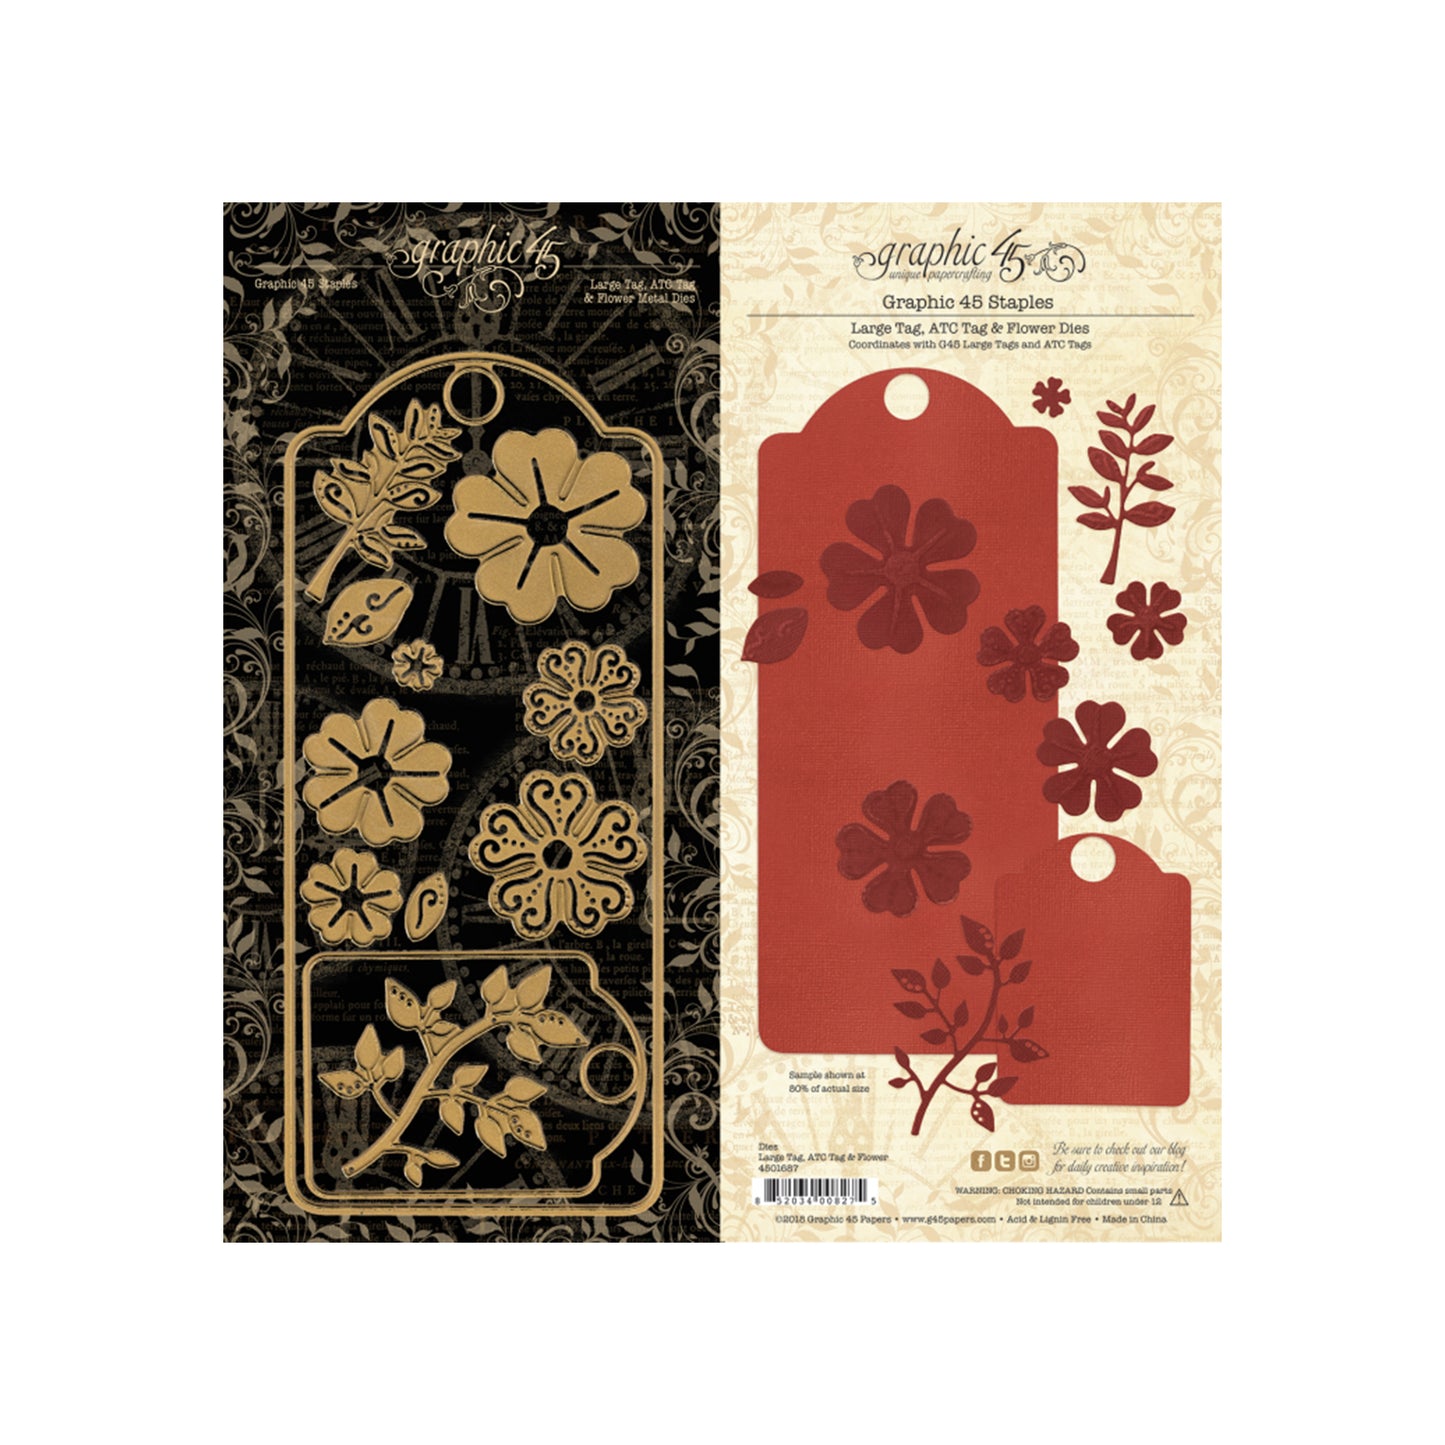 Graphic 45 - Large Tag, ATC Tag, and Flower Dies